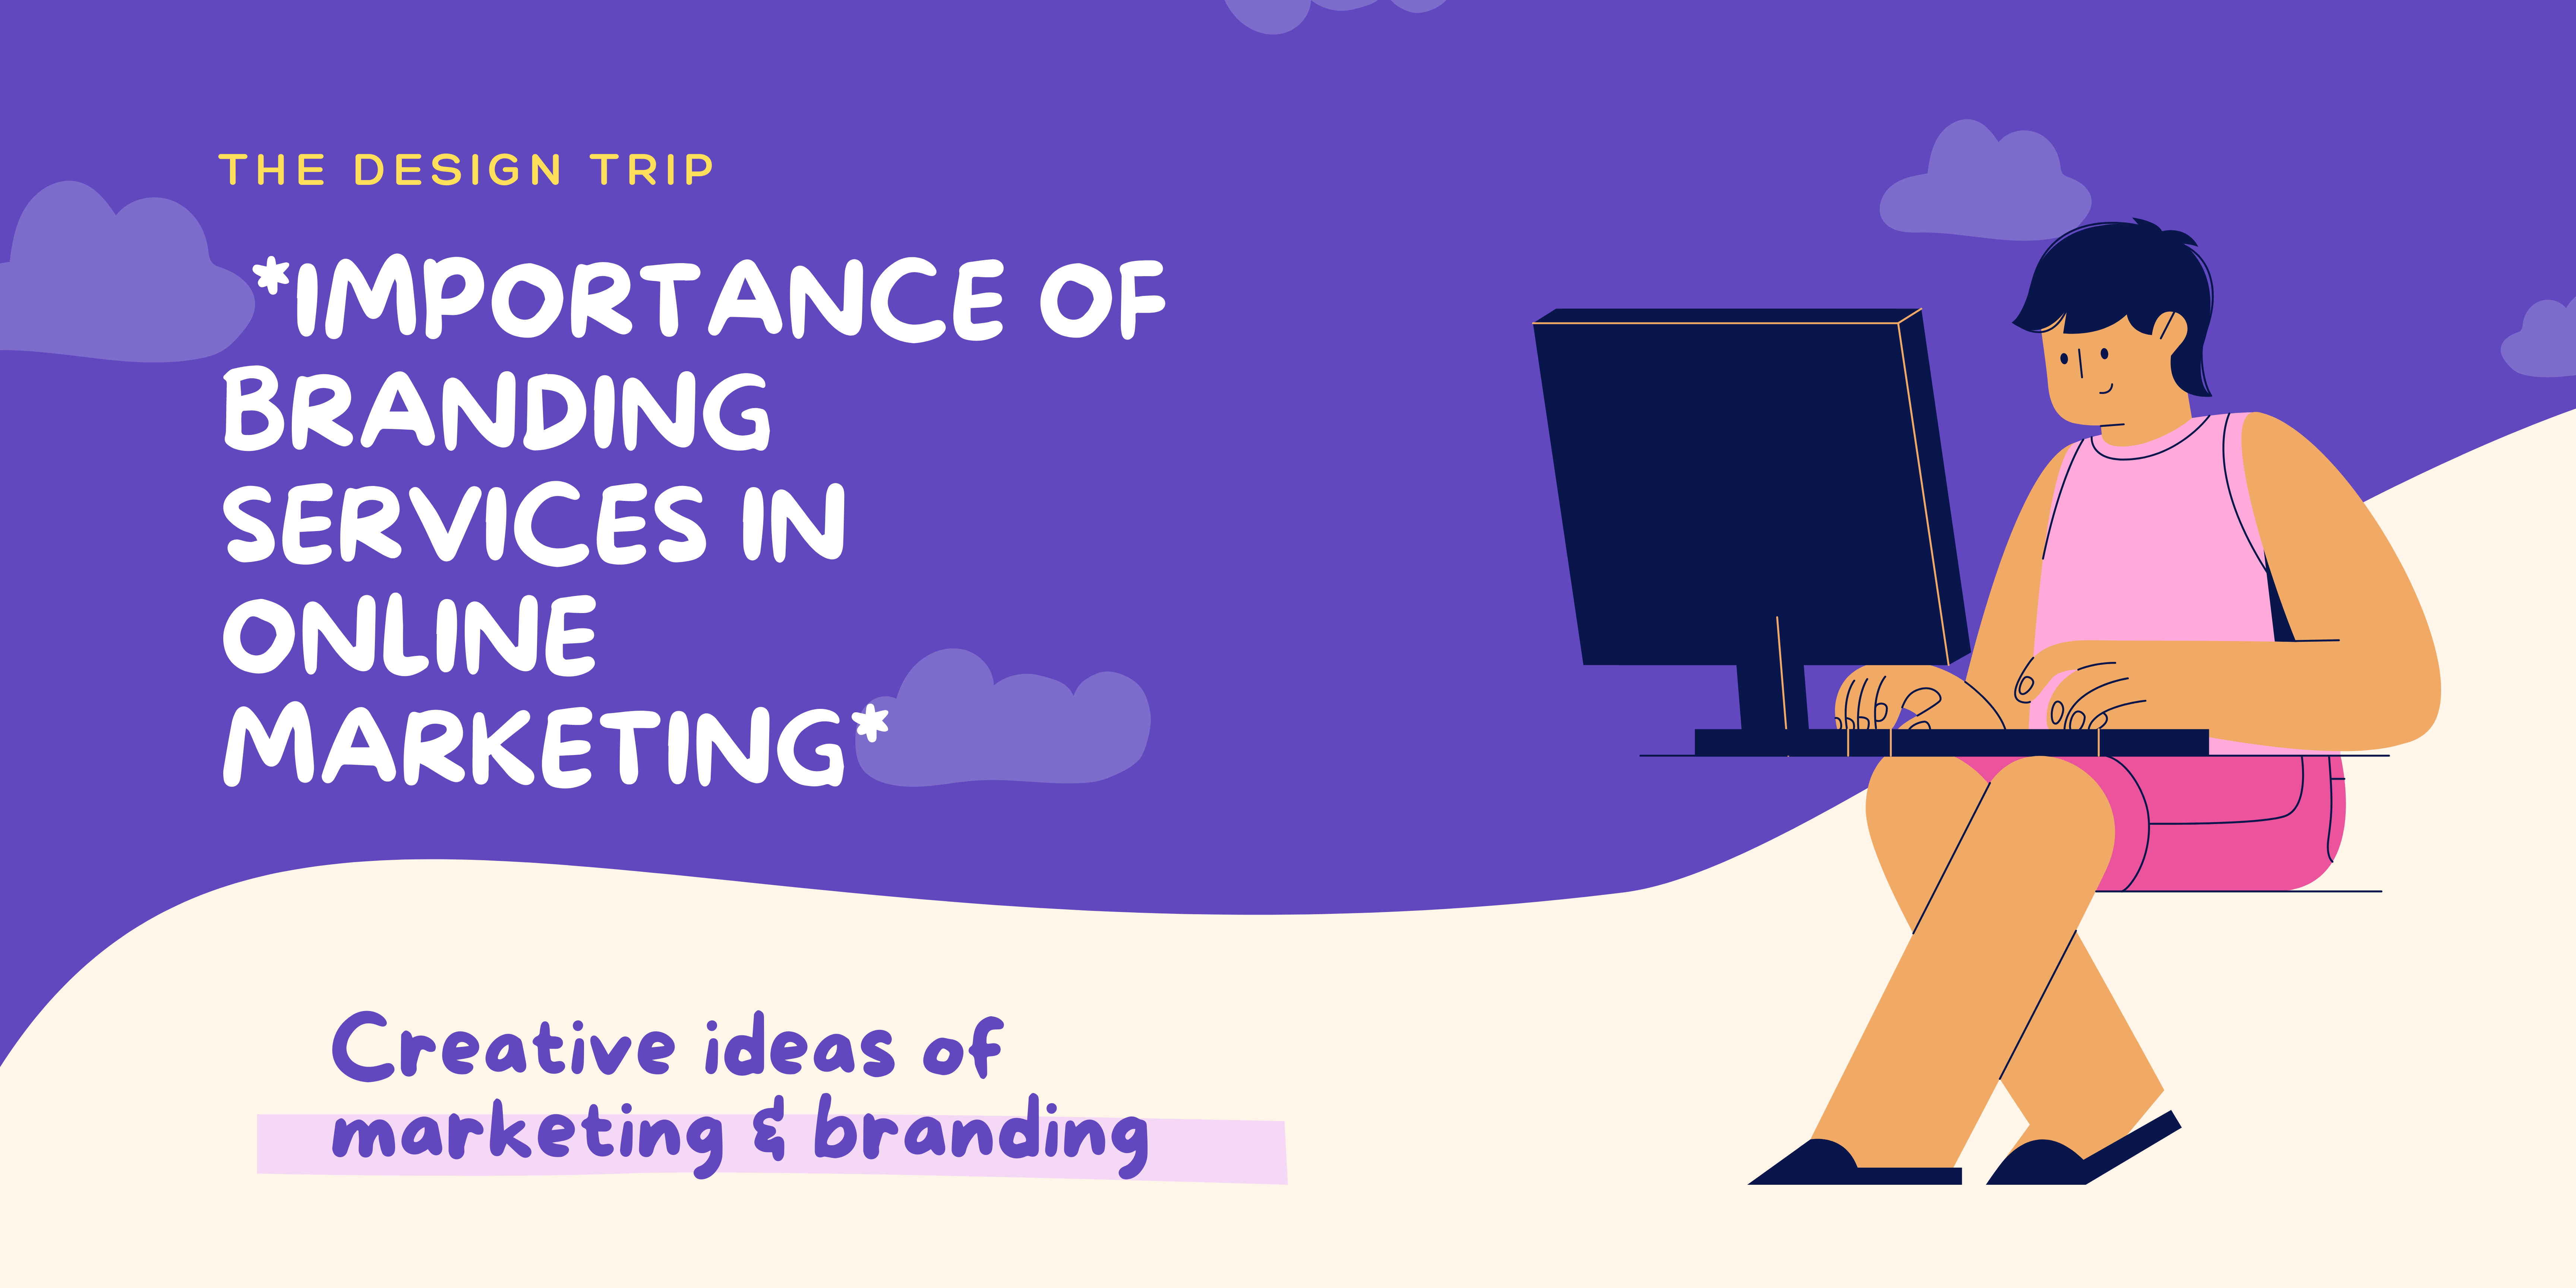 Importance of Branding Services in online marketing-ed73d248